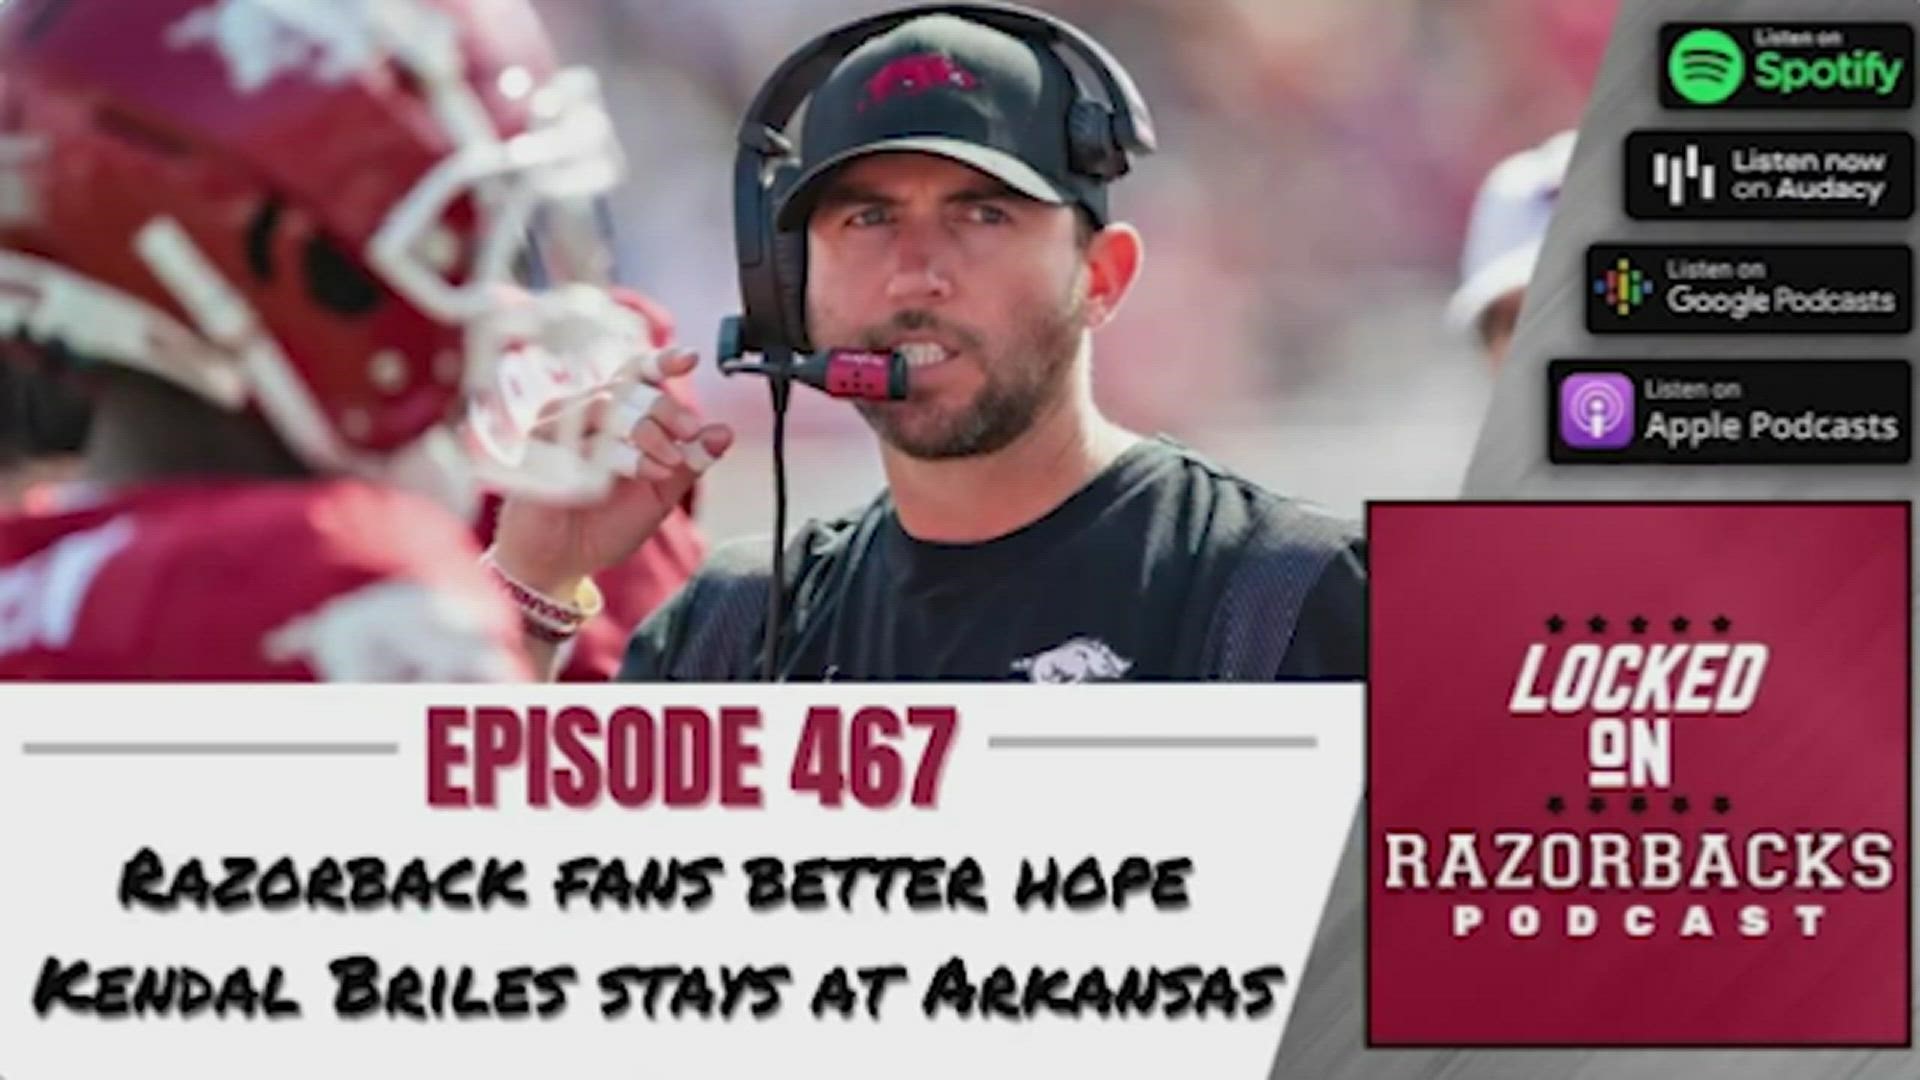 Razorback fans better hope Kendal Briles stays at Arkansas and the Hogs make short work of UCA in Bud Walton. All that and more on episode 467.